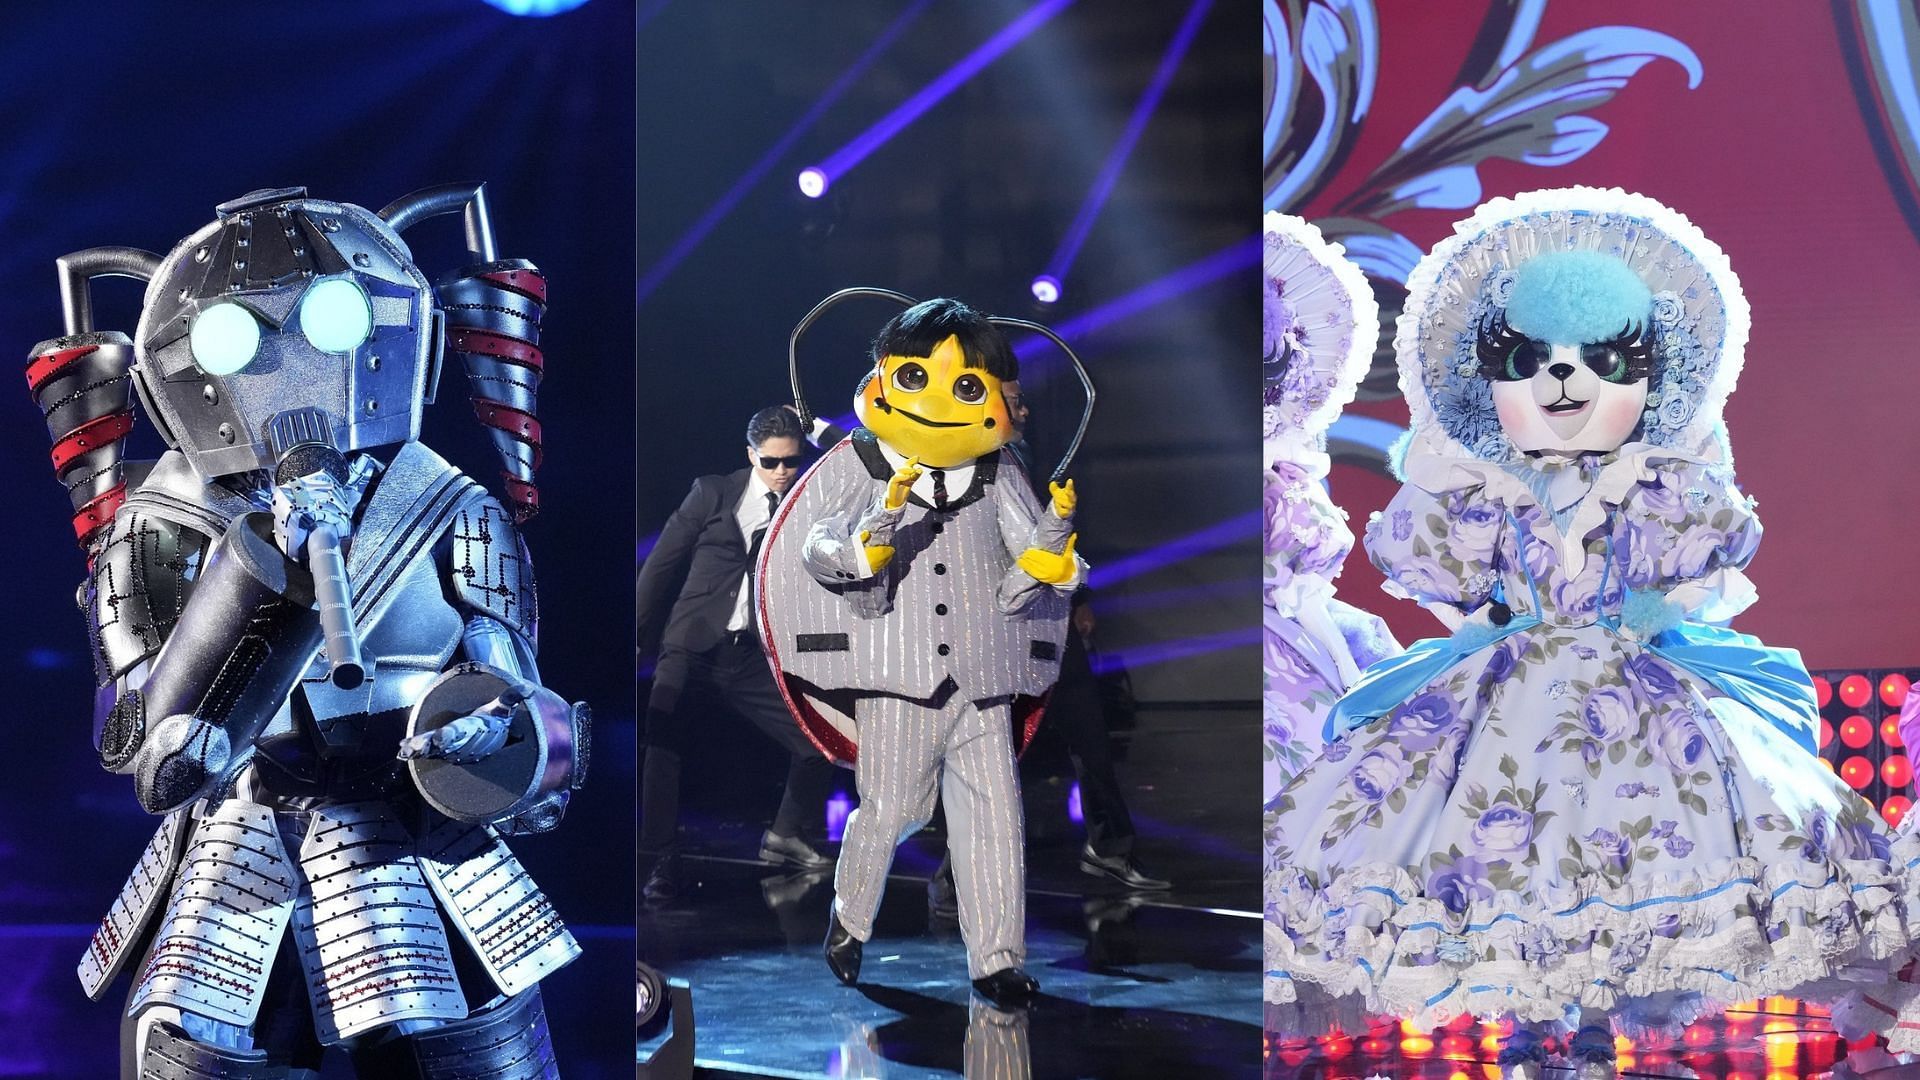 Robo Girl, The Beetle, and The Lambs from The Masked Singer Season 8 Episode 5